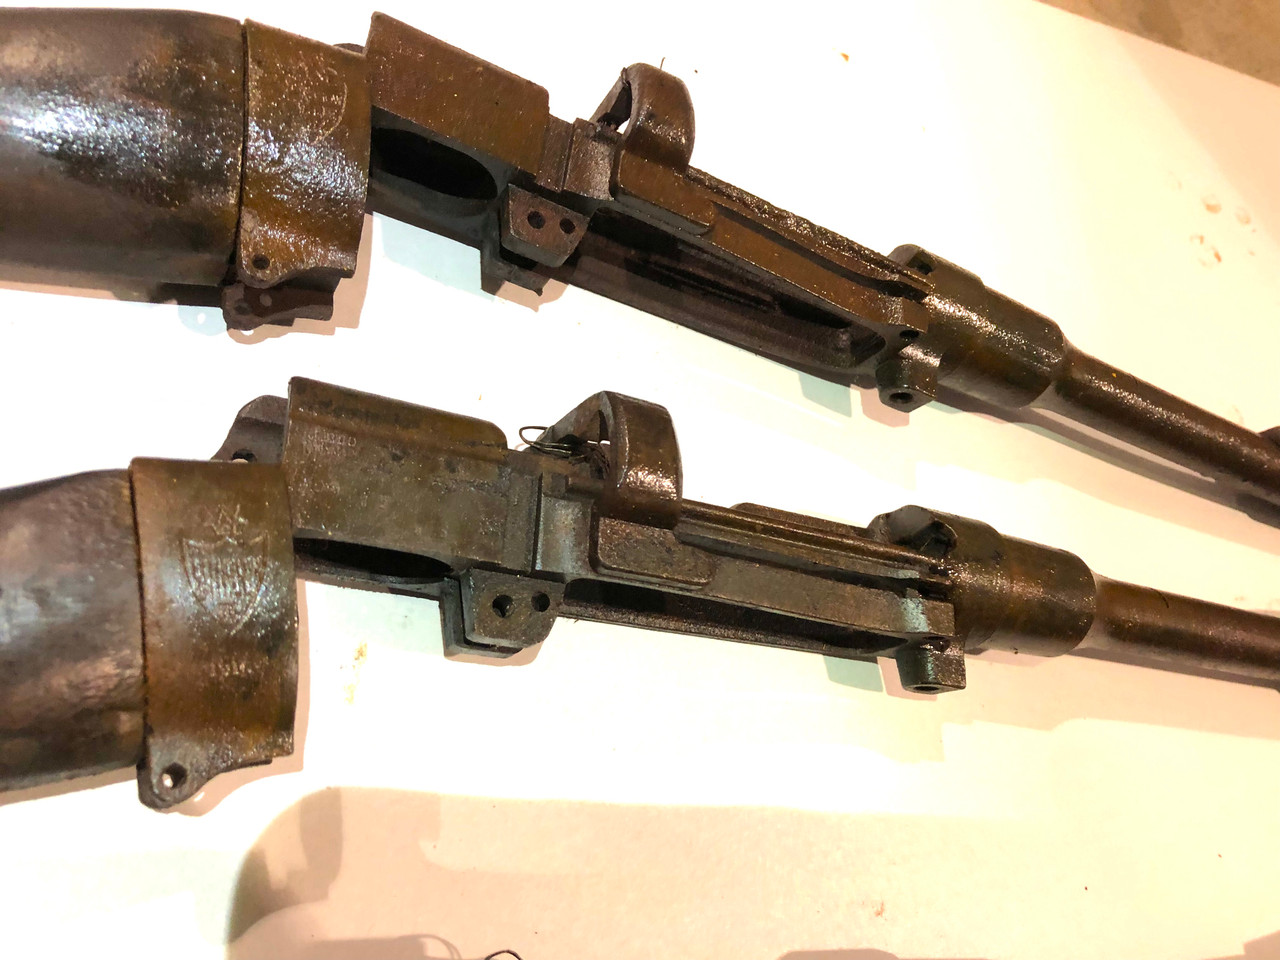 Lot 1: 5 x Lithgow No1 MKIII DP Barreled Receivers with Cut Barrels (FFL Required)